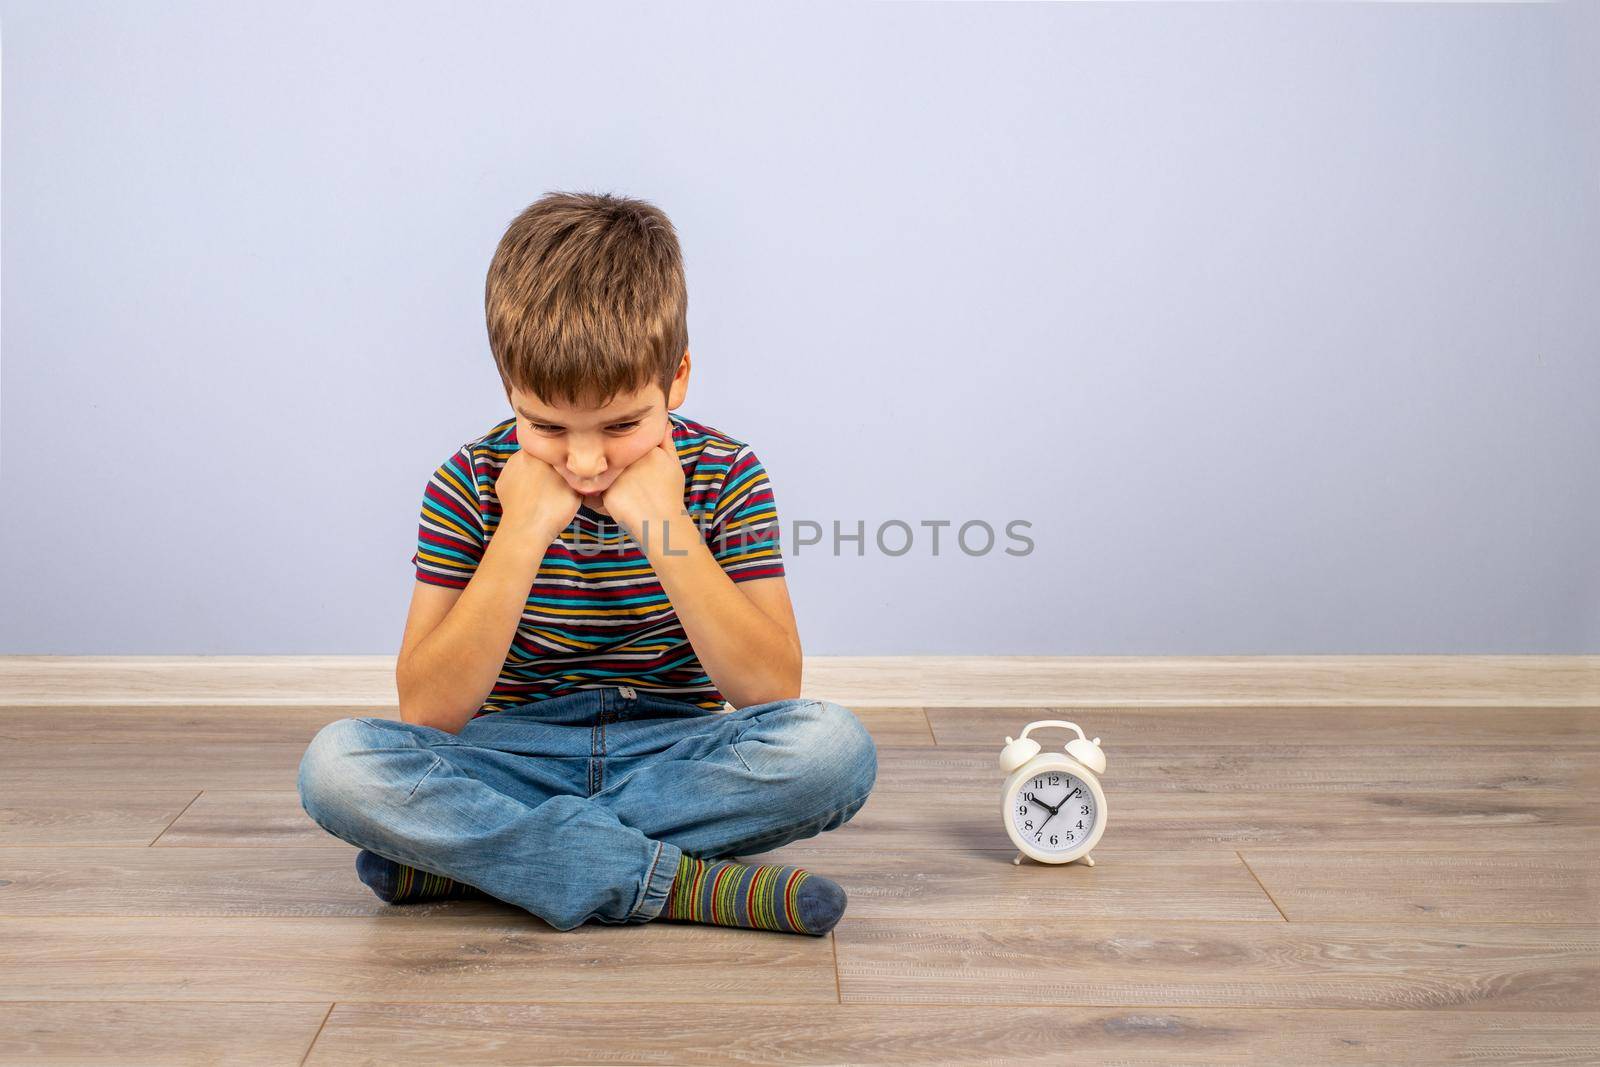 A cute little boy in a T-shirt and jeans is sitting on the floor next to the clock waiting. The boy's pose is tired of waiting.